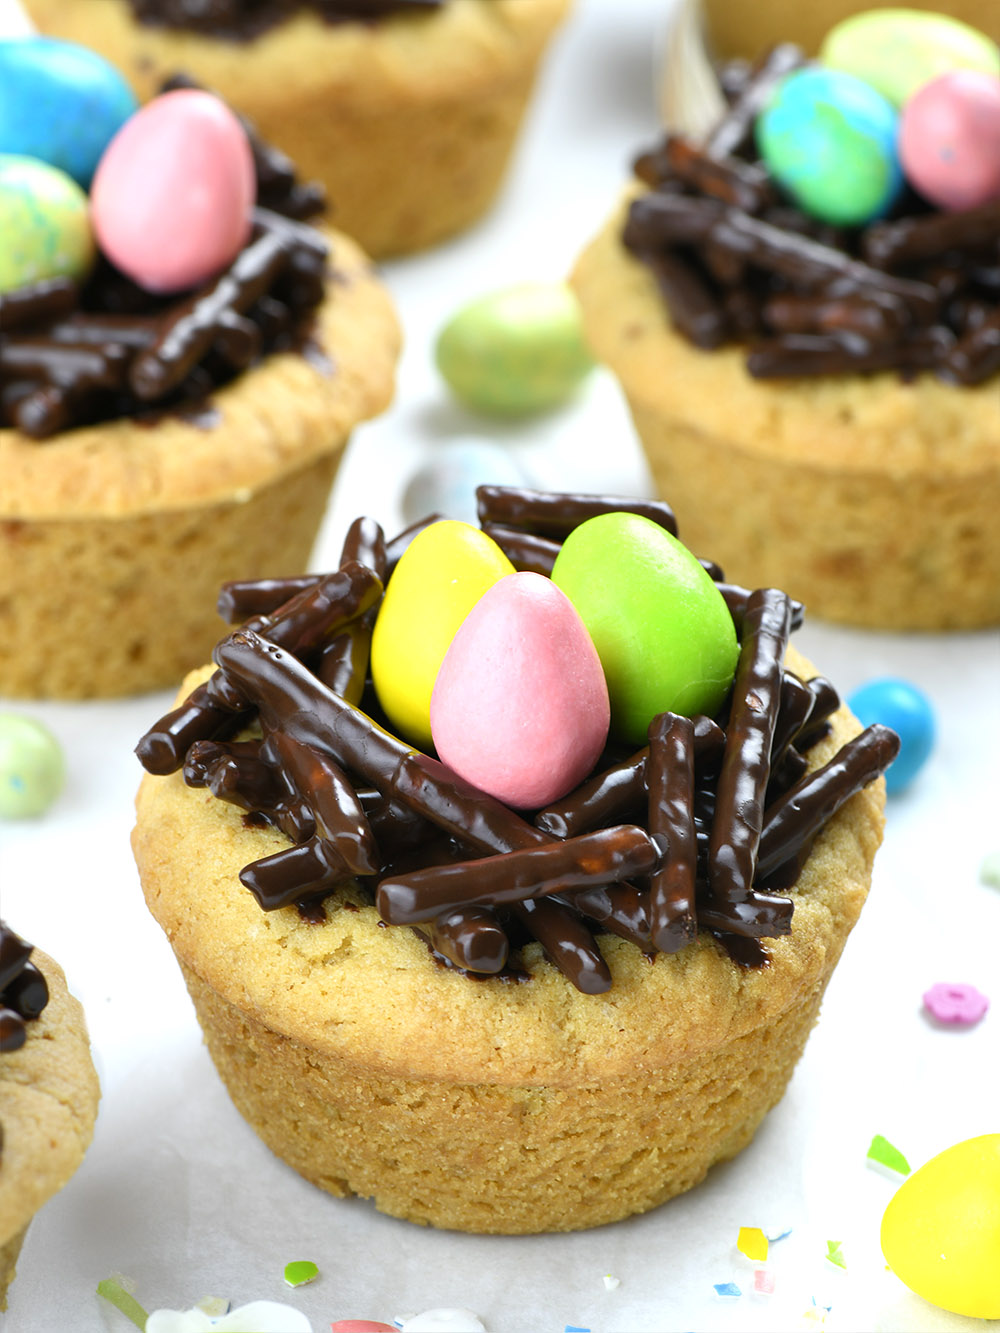 Cookie cup, filled with Nutella and Chocolate-Pretzel Nest with 3 easter eggs (candies) on the top.